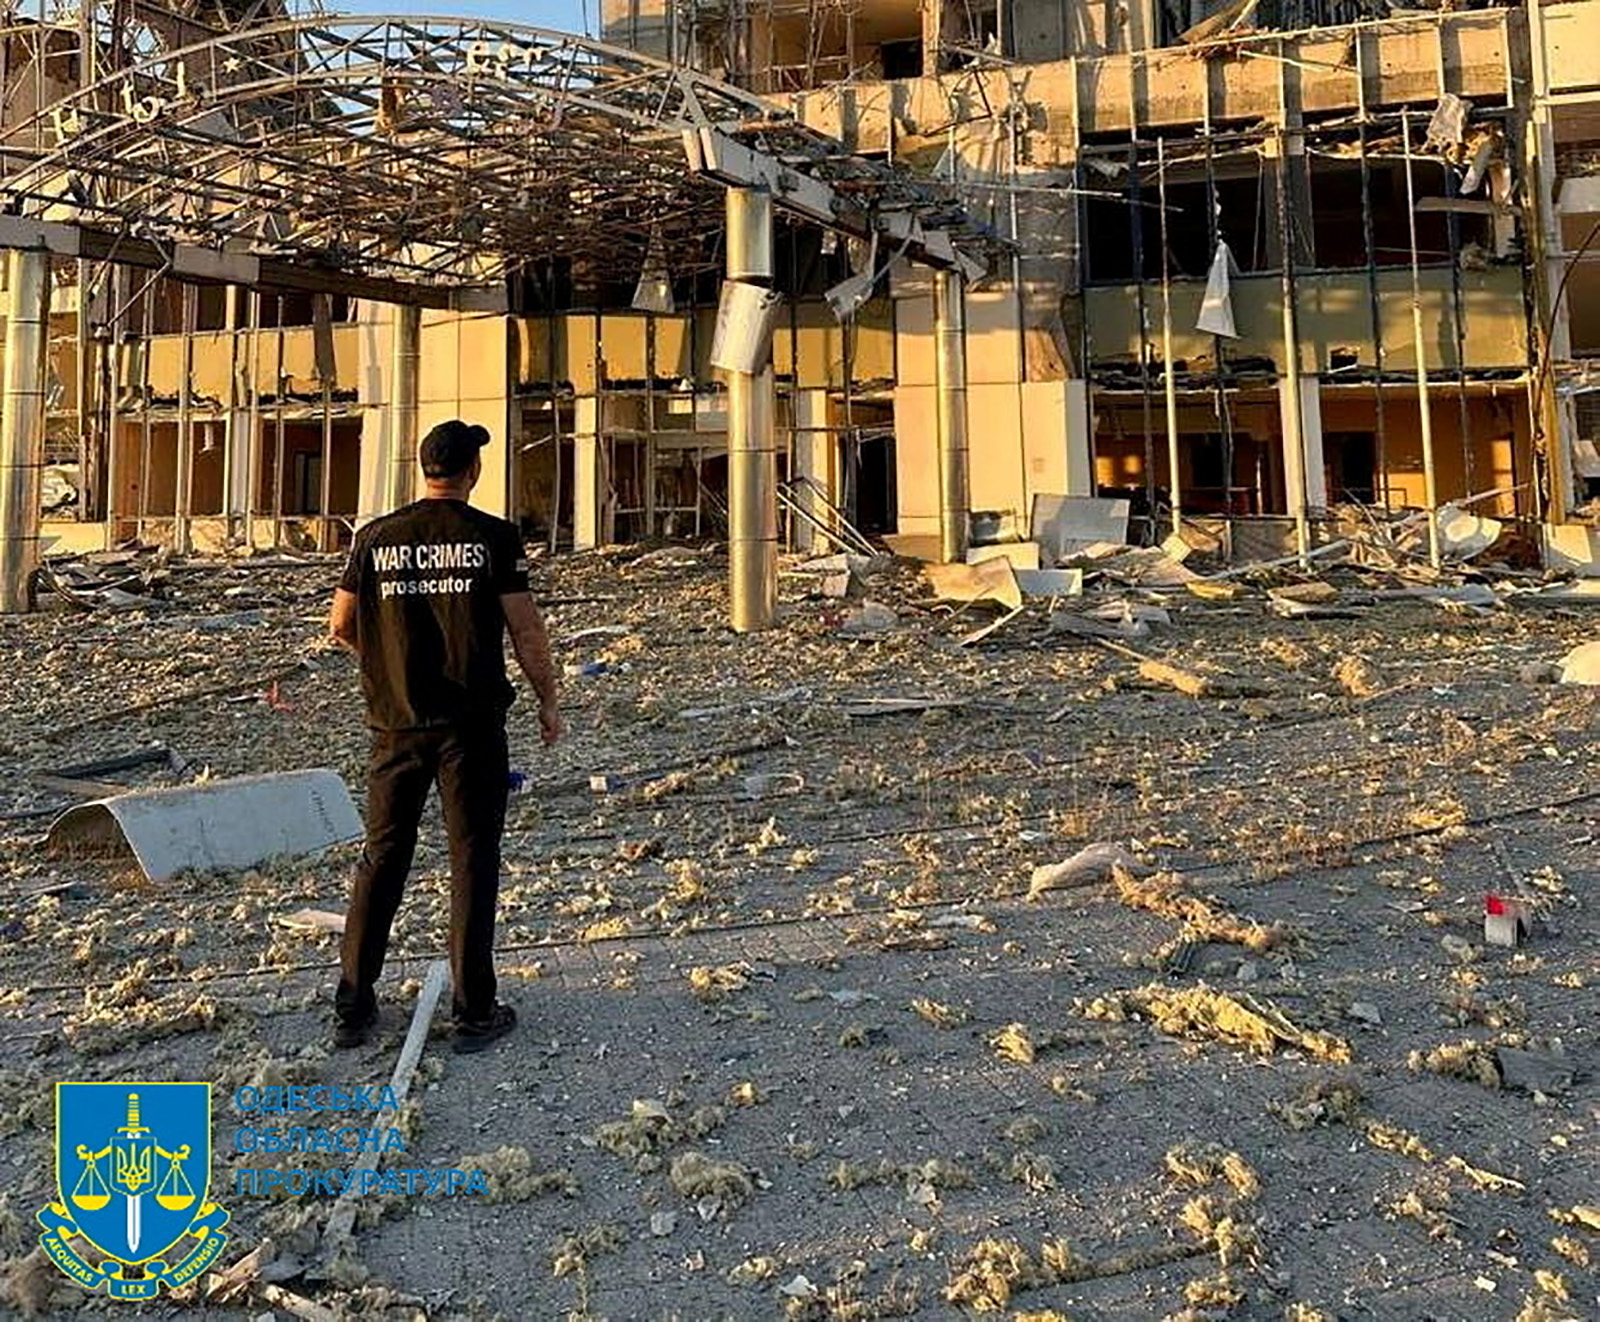 A member of Odesa Regional Prosecutor's Office personnel inspects damage following a Russian military attack in Odesa, Ukraine, in this image released on September 25.